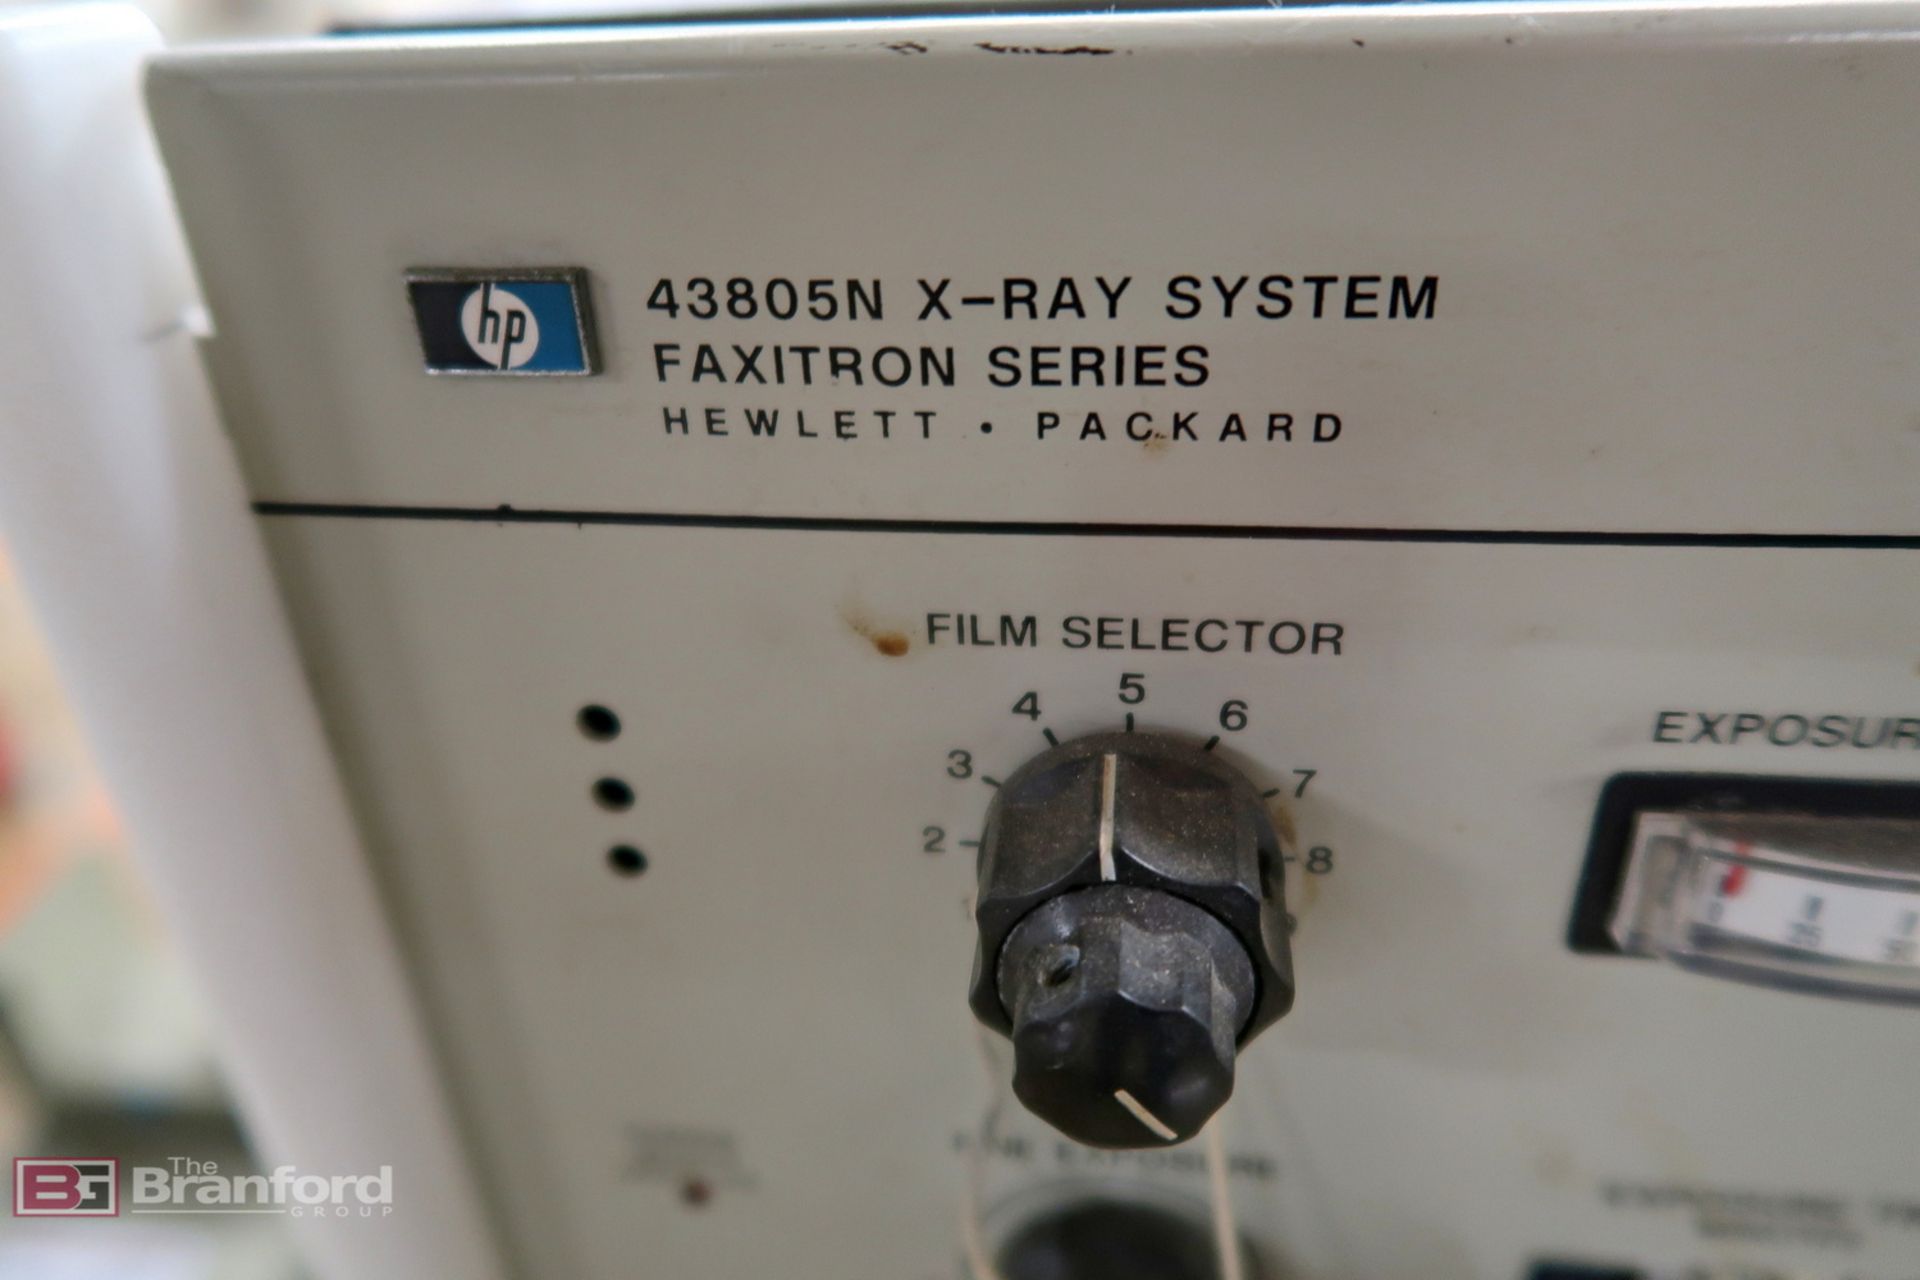 HP model 43805n X-ray system, faxitron series - Image 3 of 3